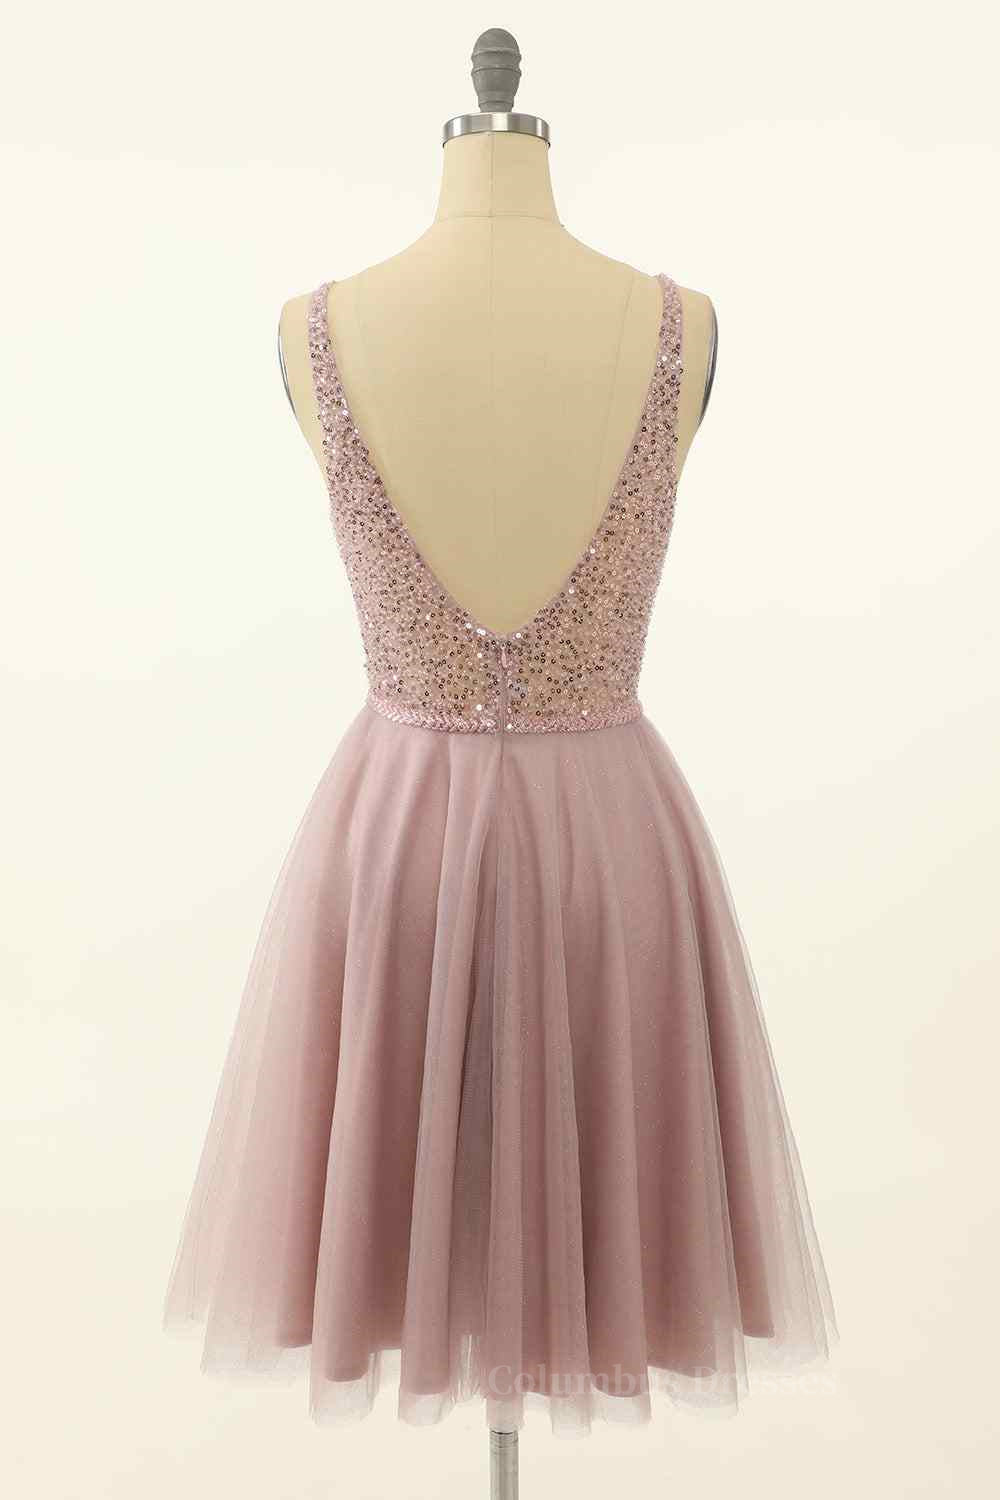 Party Dress High Neck, Dusty Pink A-line V Neck Sequins Tulle Mini Homecoming Dress